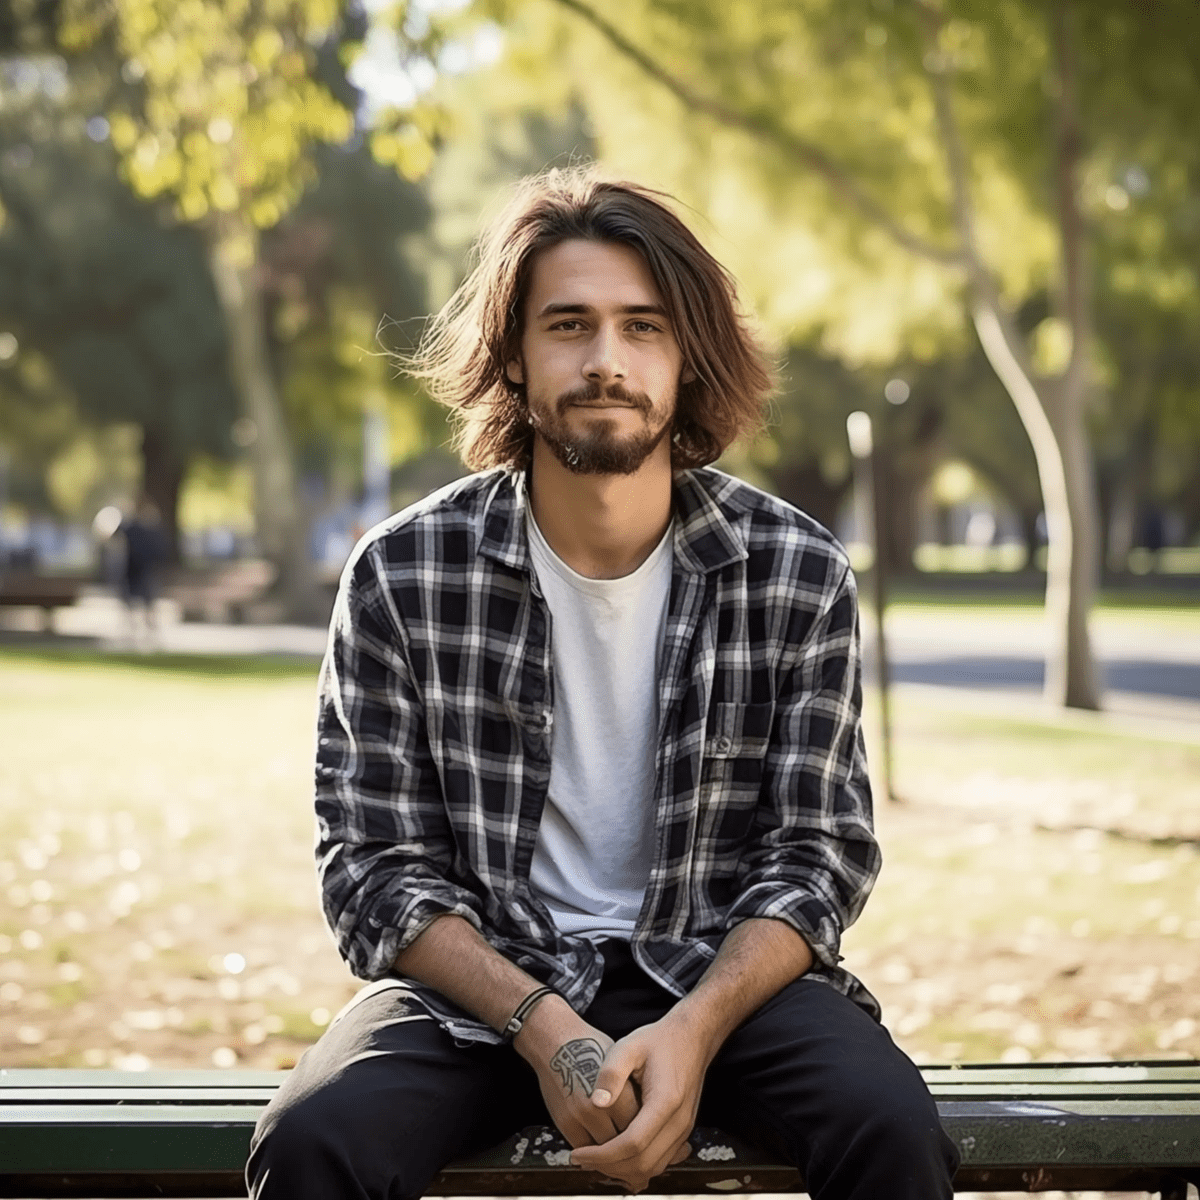 19 year old male with mid length brown hair sitting on a park bench in Melbourne